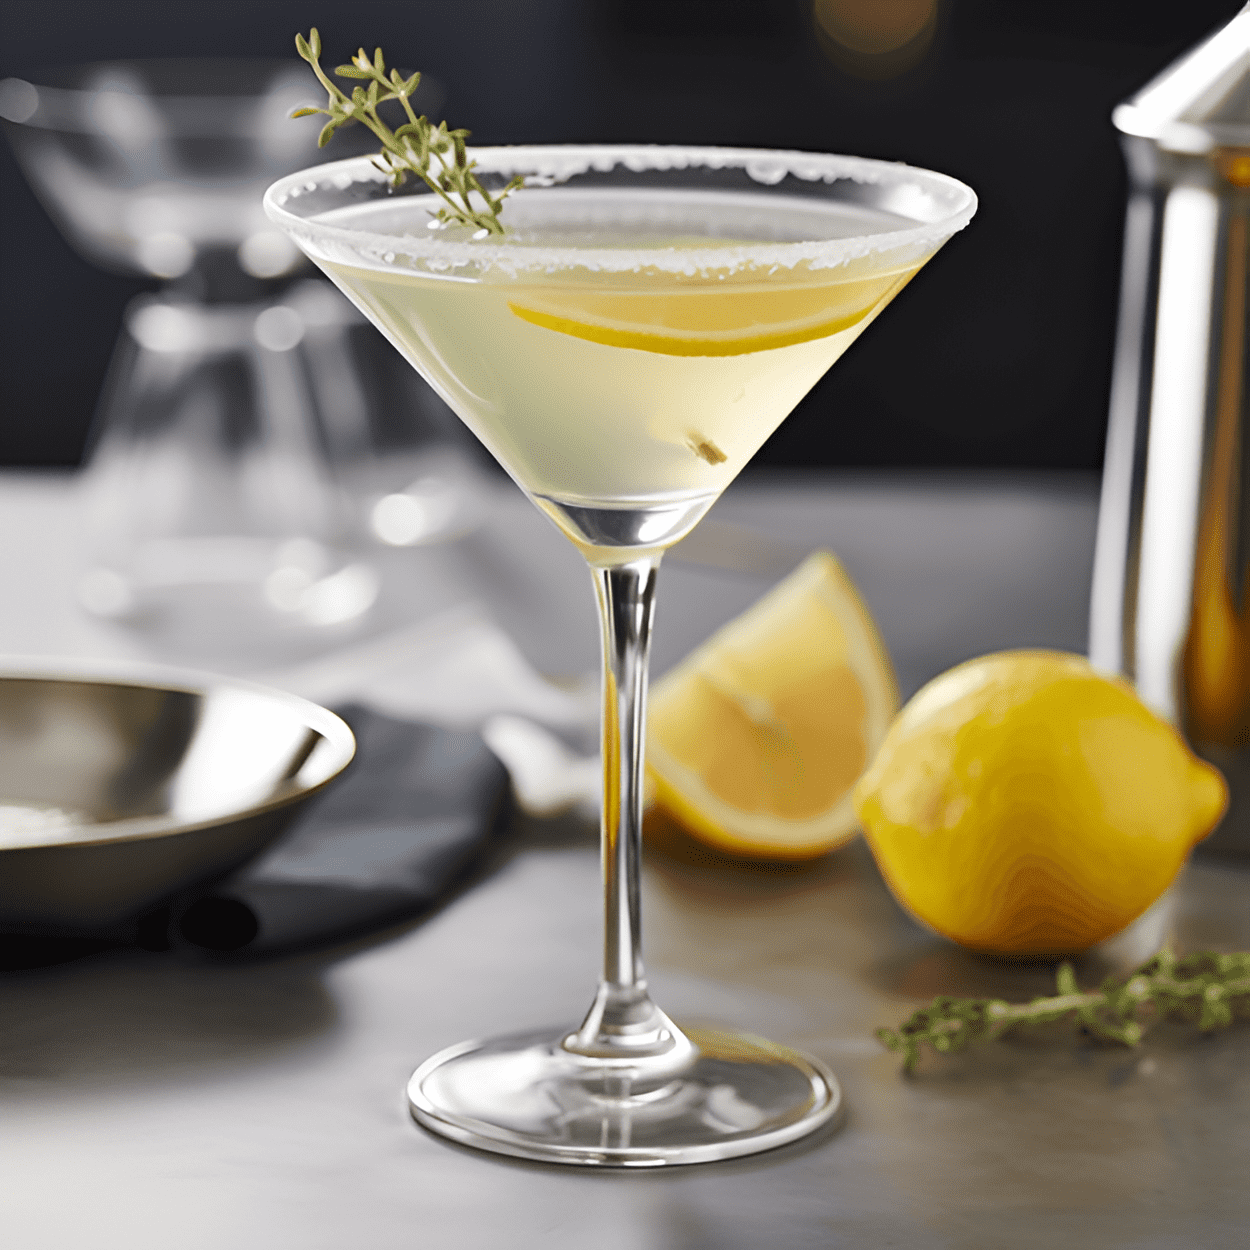 Esquire Martini Cocktail Recipe - The Esquire Martini is a strong, dry cocktail. It has a crisp, clean taste with a hint of bitterness from the vermouth. The gin provides a robust, juniper-forward flavor that is balanced by the subtle sweetness of the orange bitters.